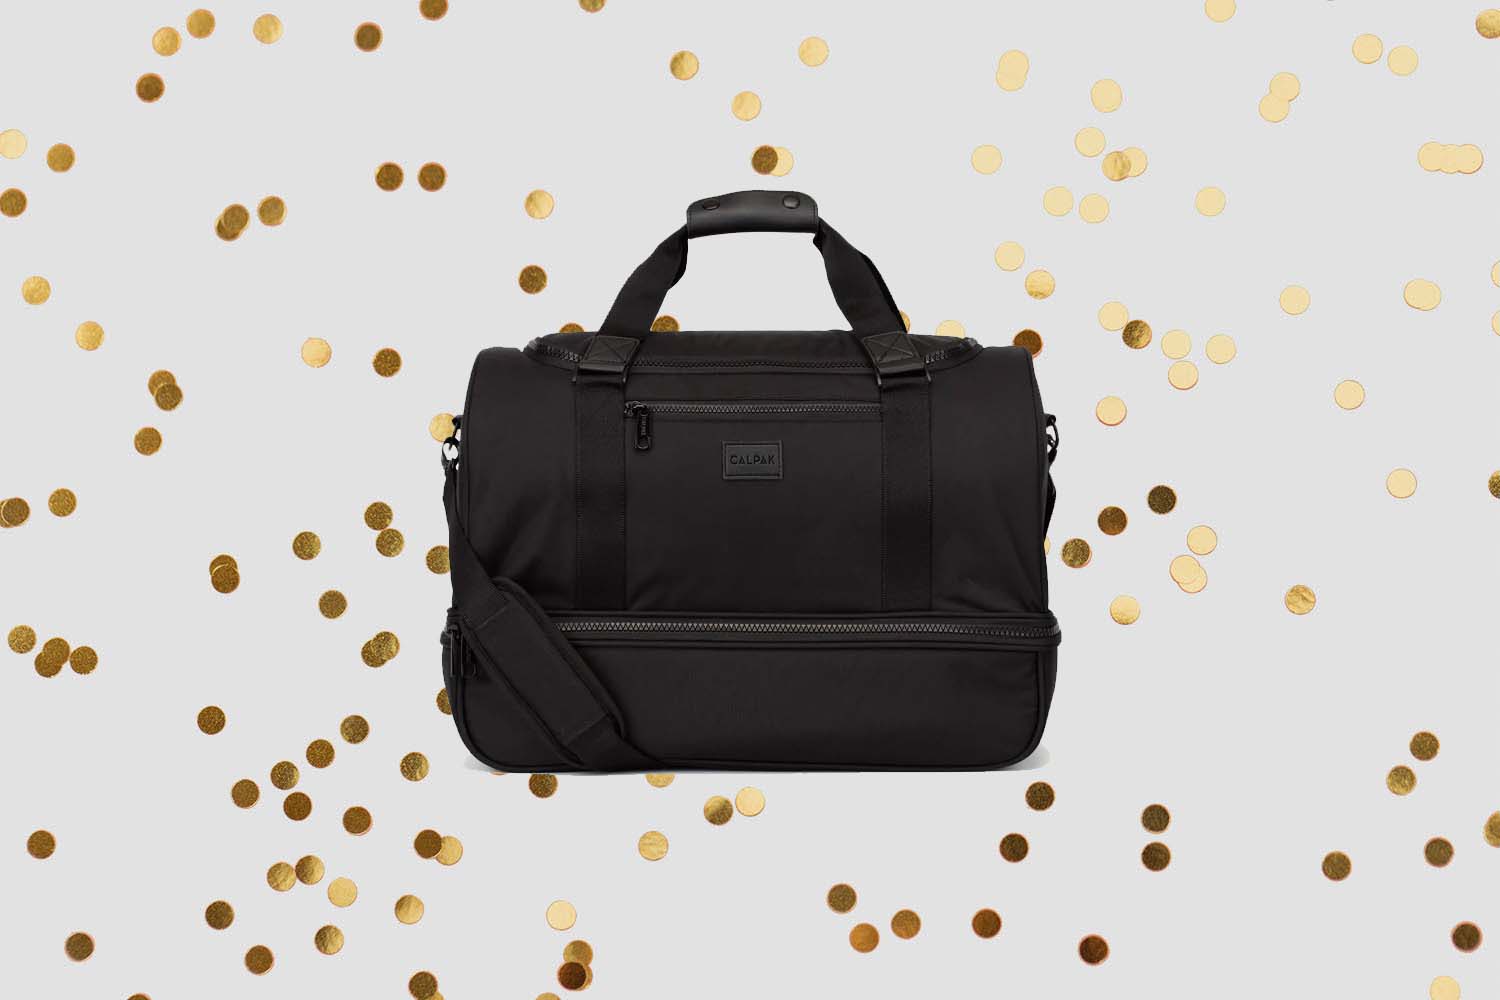 This Calpak Duffel Bag Is on Sale for Black Friday